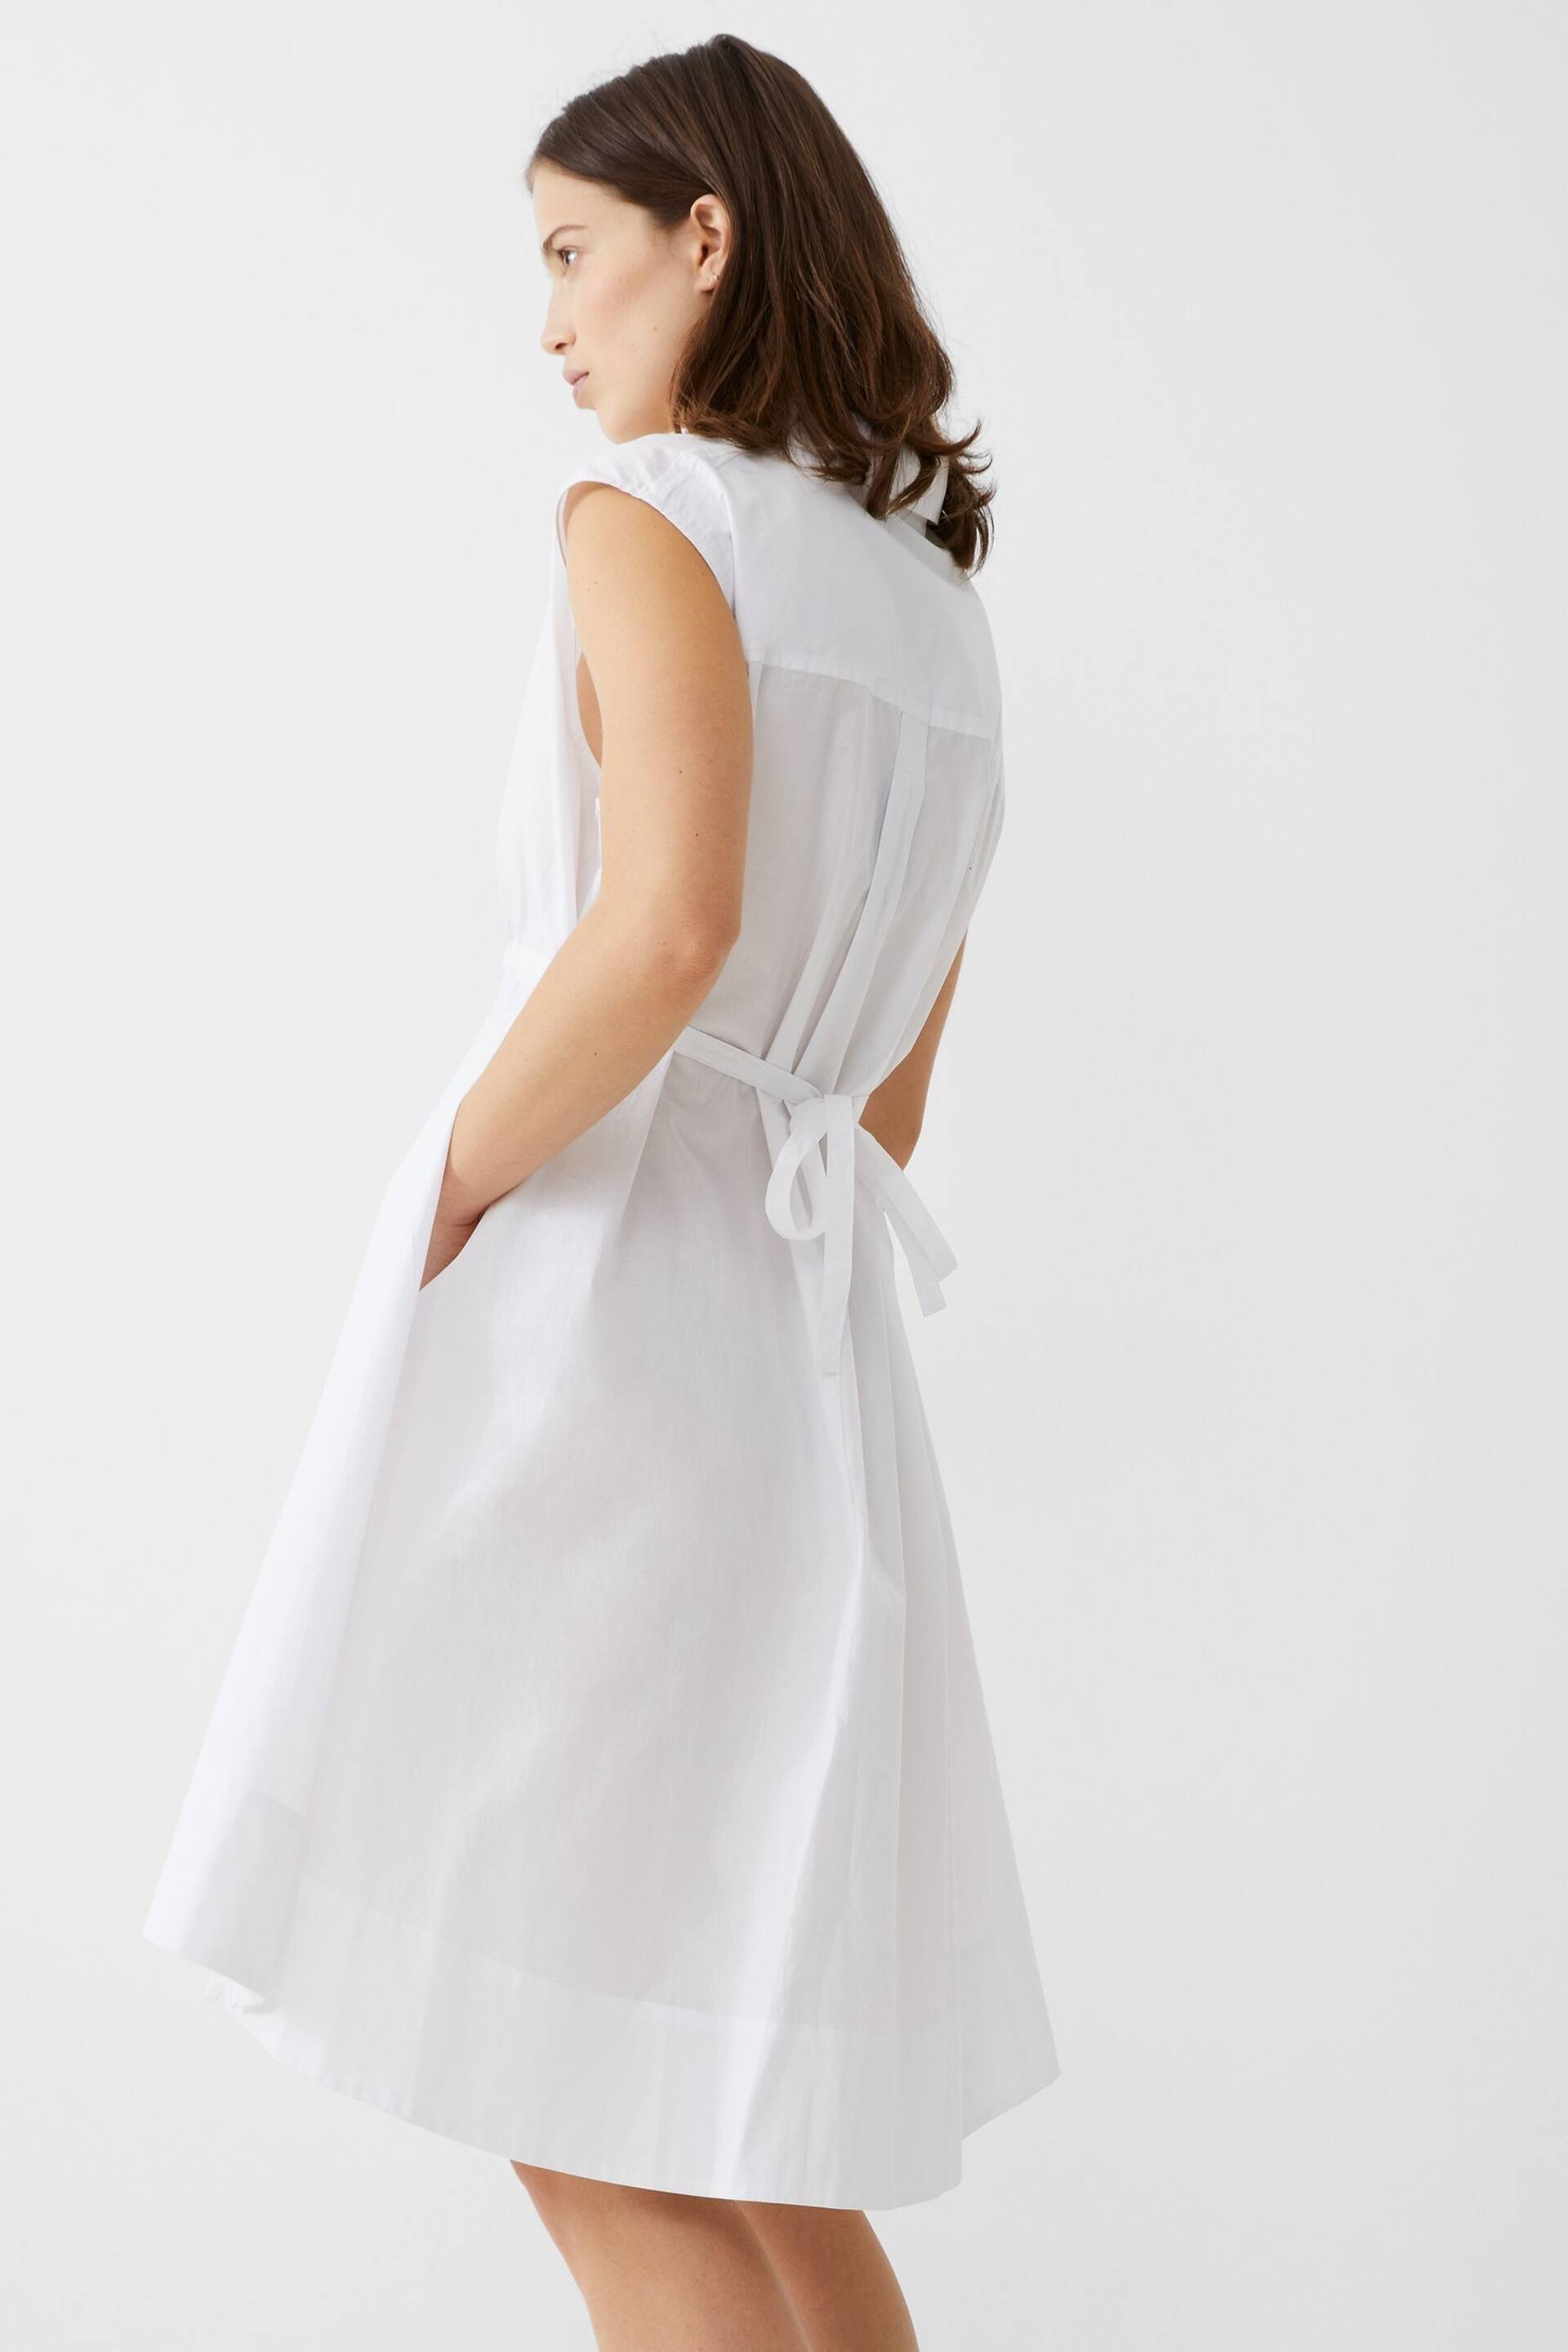 French Connection Rhodes Poplin Shirt Dress - Image 2 of 4